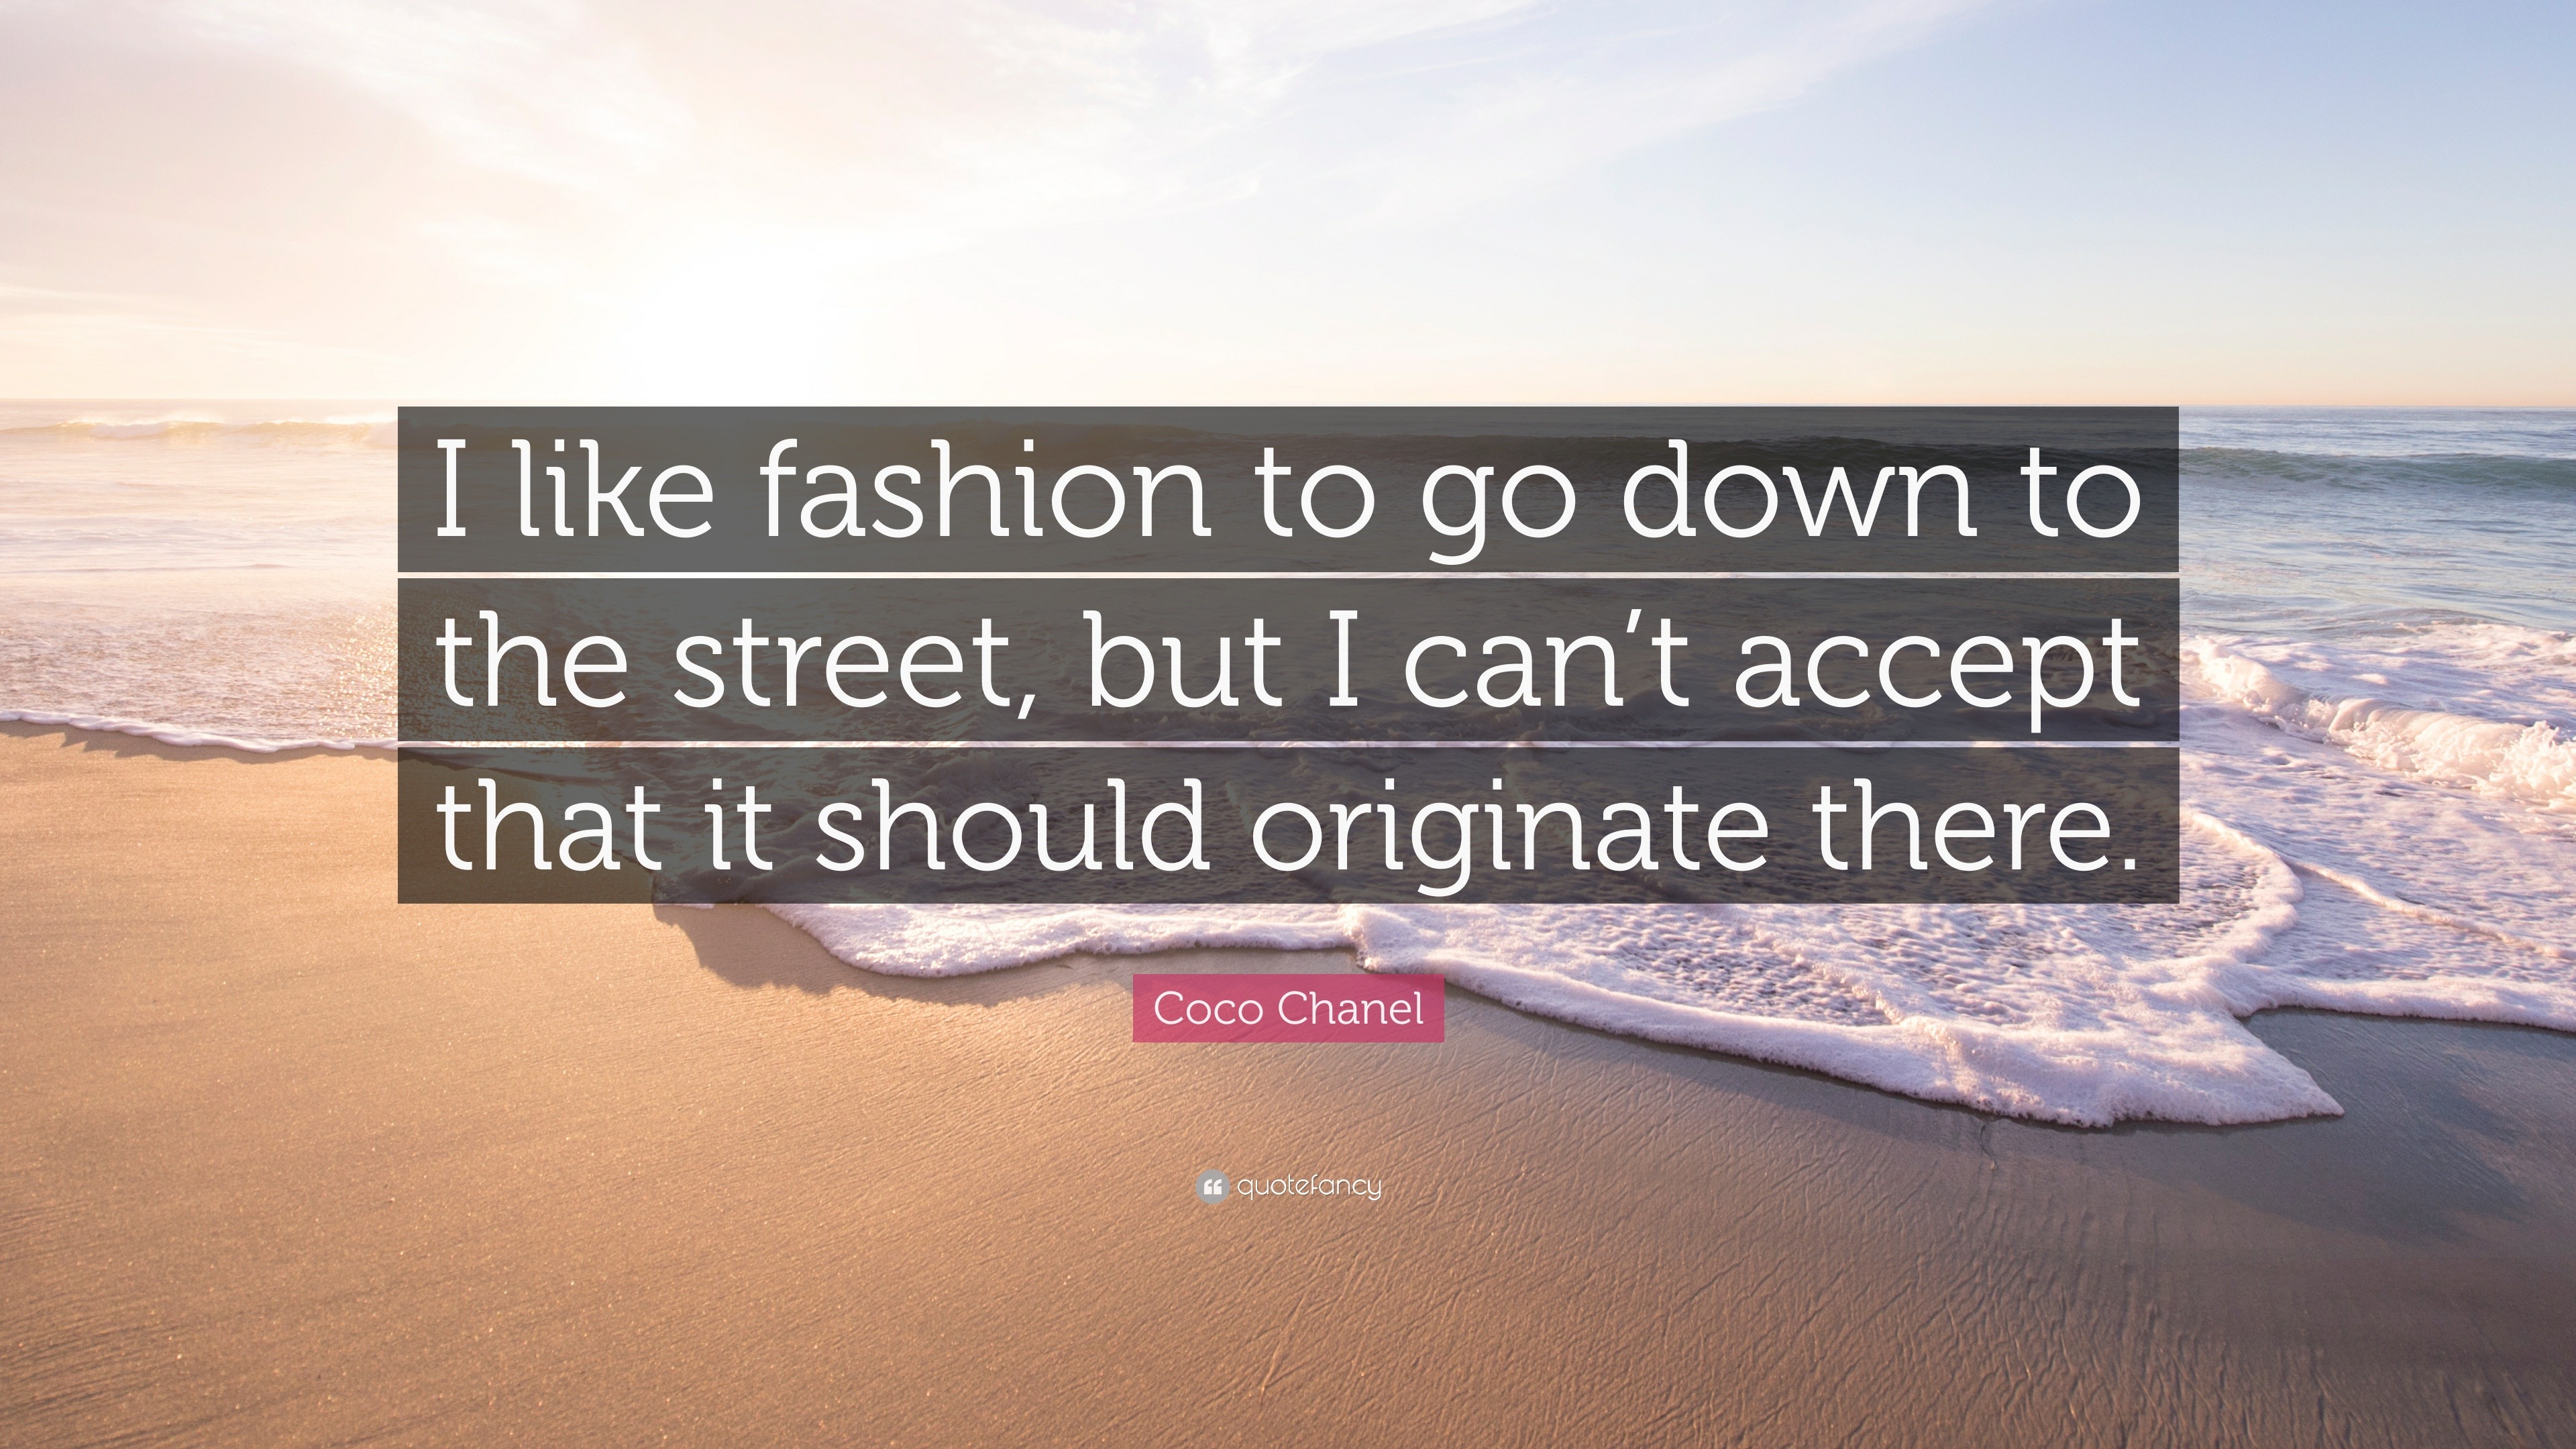 Coco Chanel “I like fashion to go down to the street, but I can't